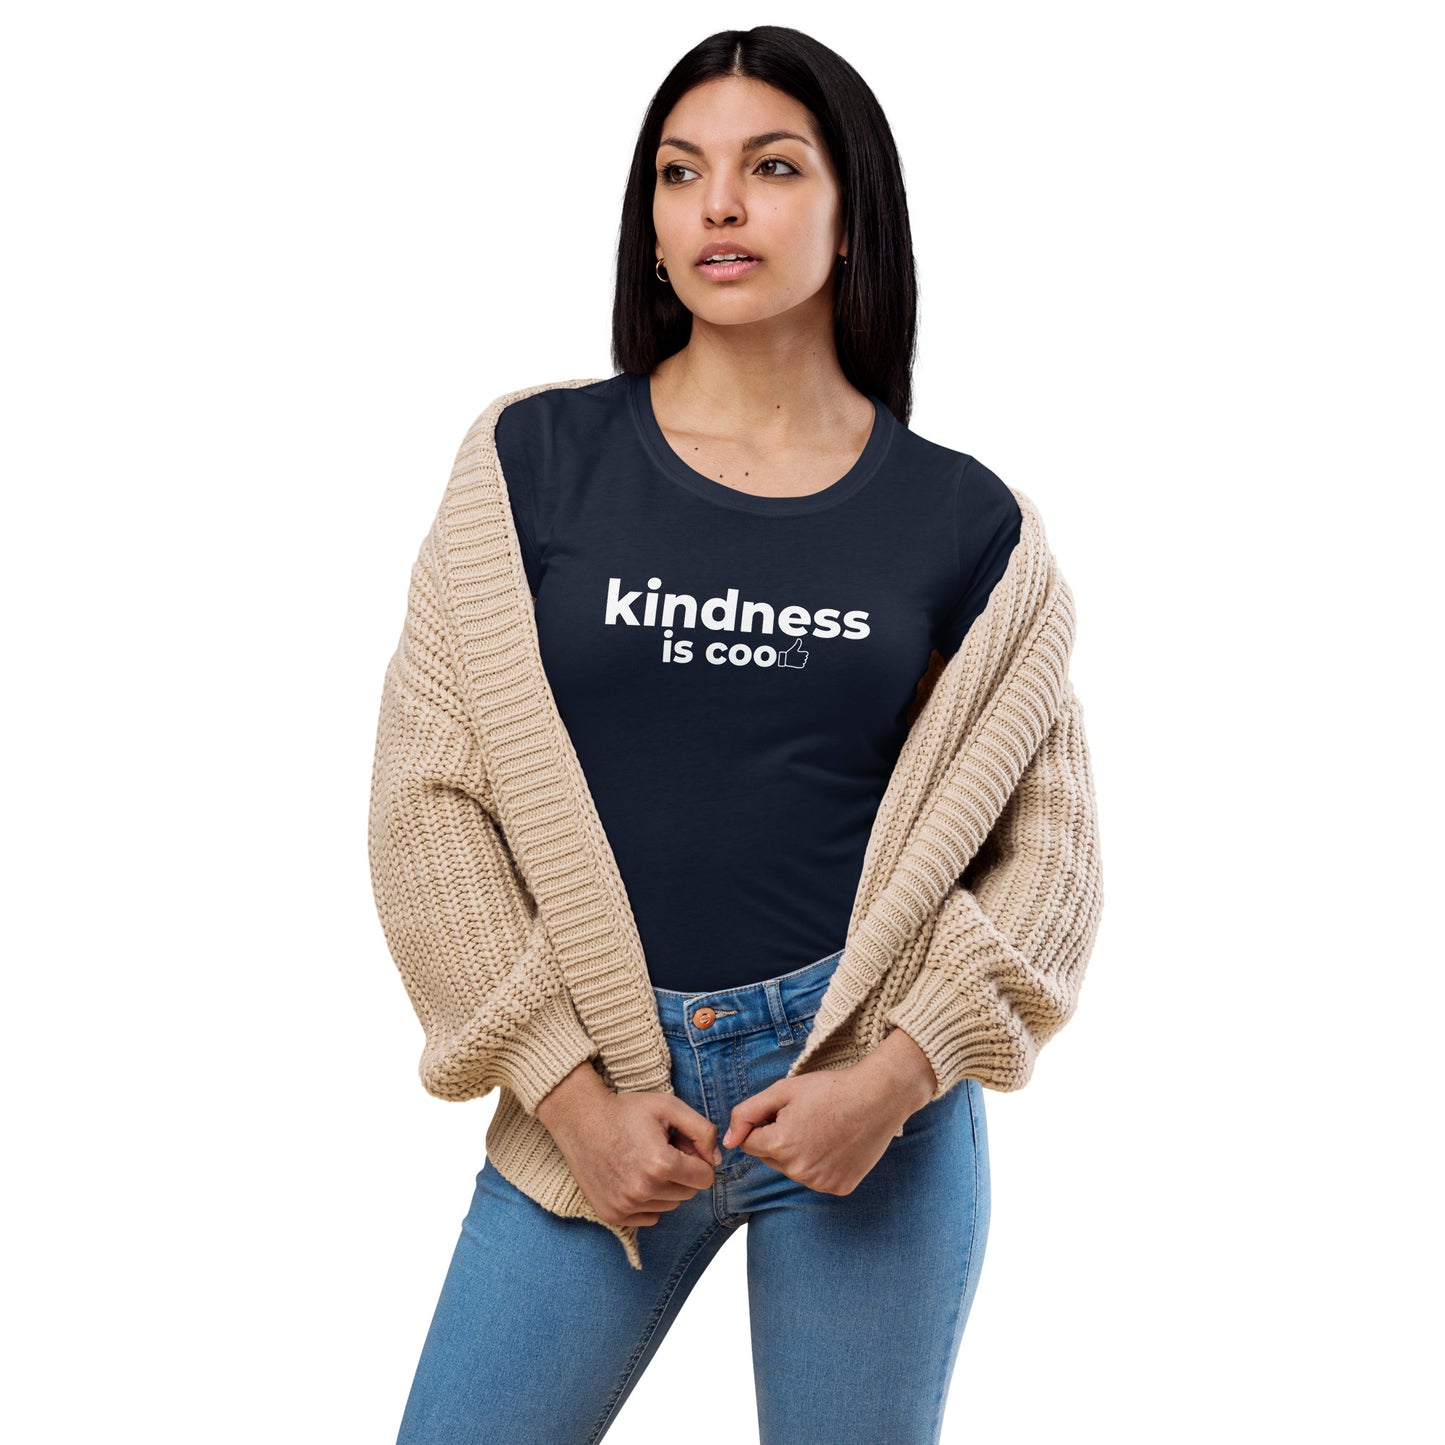 Kindness is Cool - Women’s fitted t-shirt